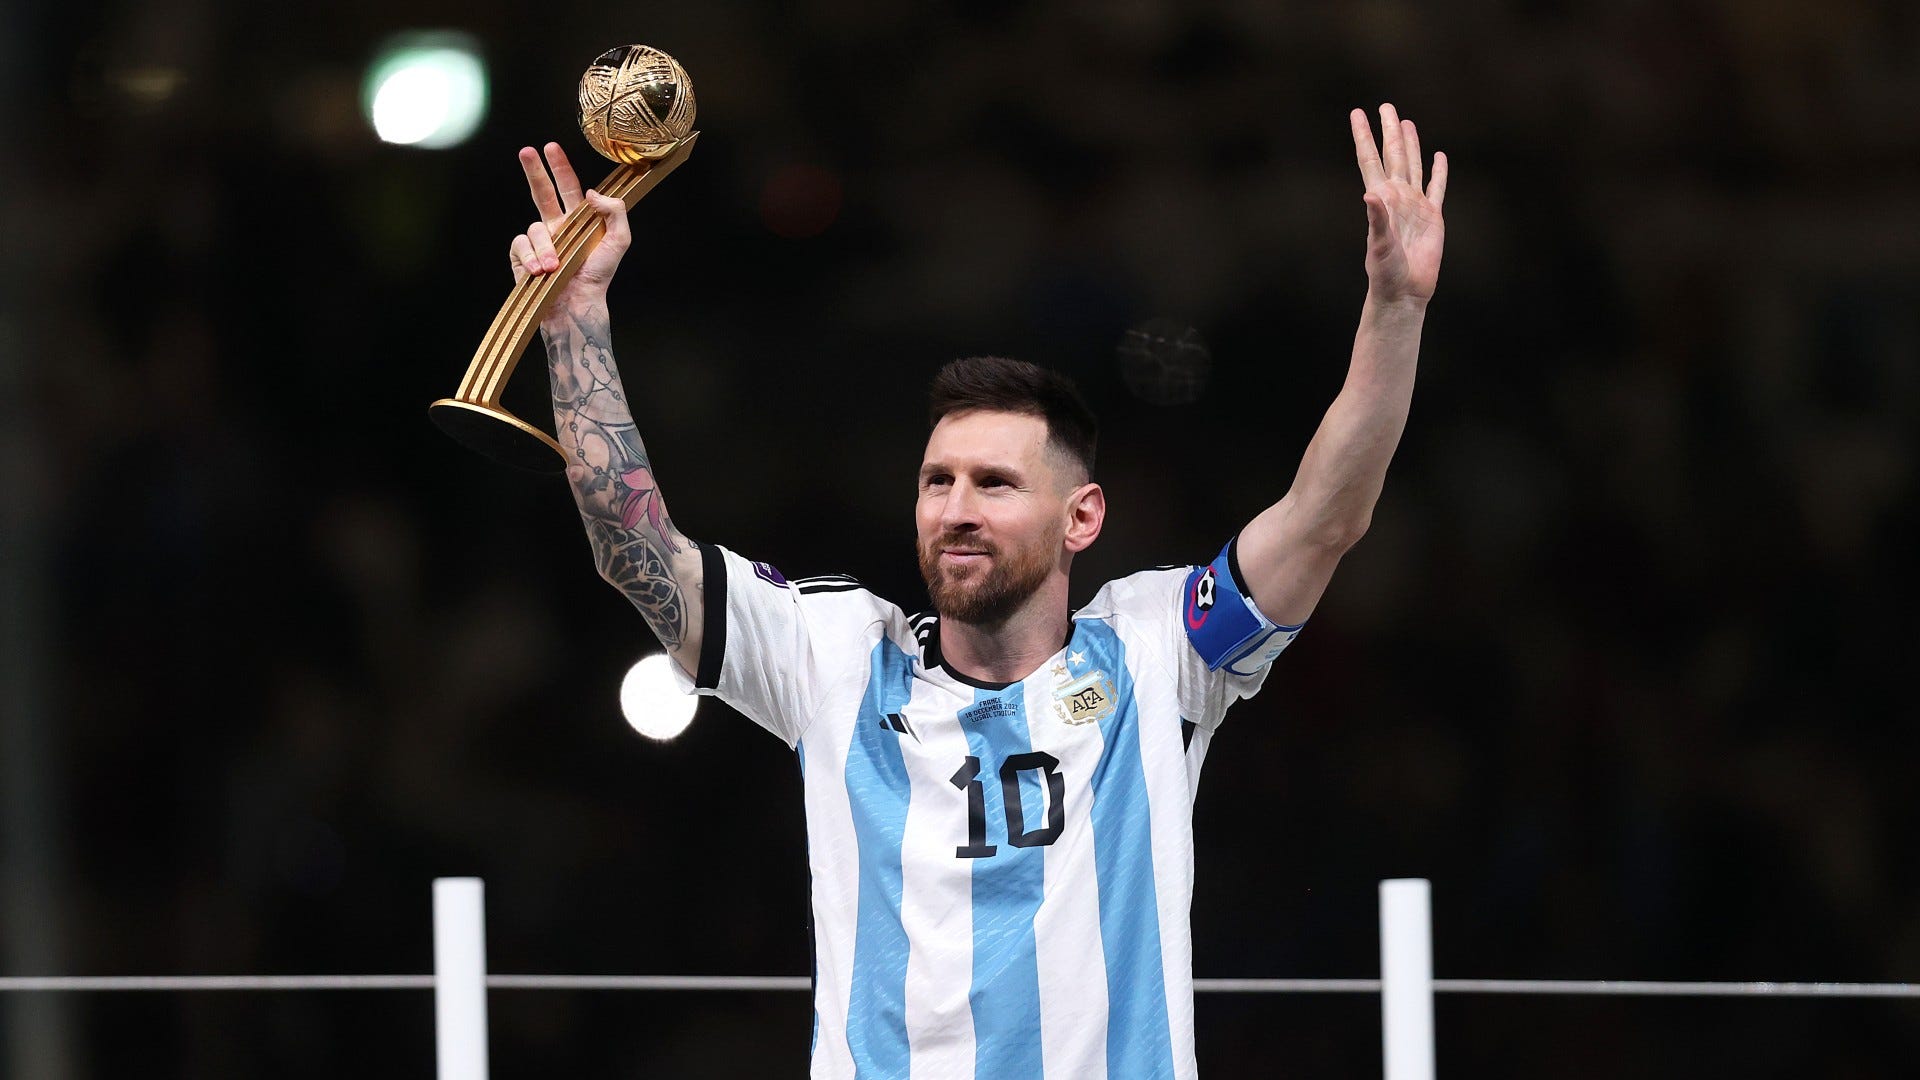 Today at the World Cup: Crunch time for Lionel Messi and Argentina